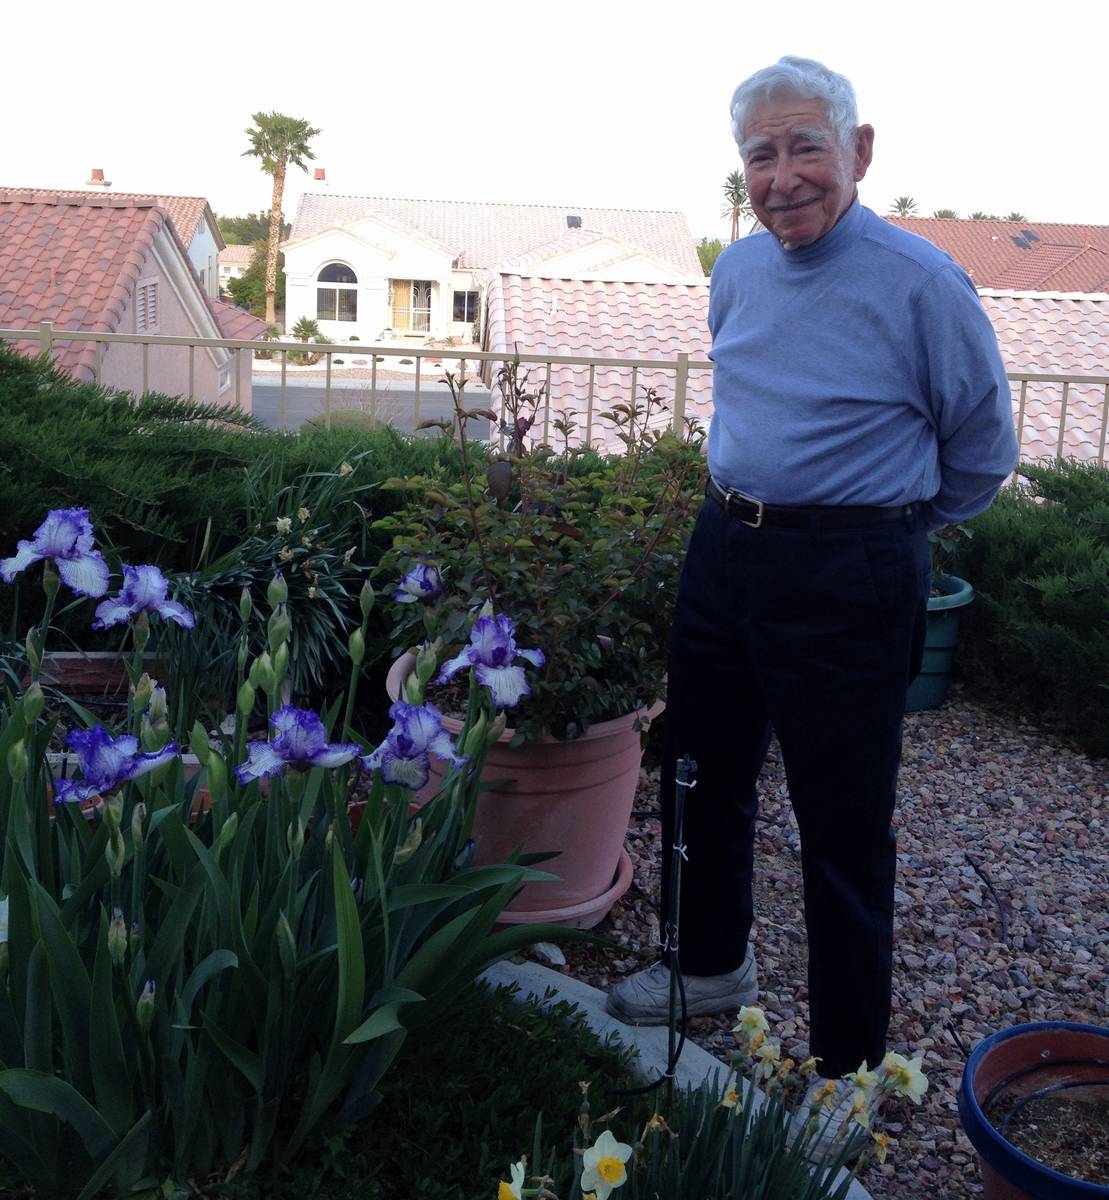 Jerome "Jerry" Countess in the backyard garden of his Summerlin home. (Jane Seda)